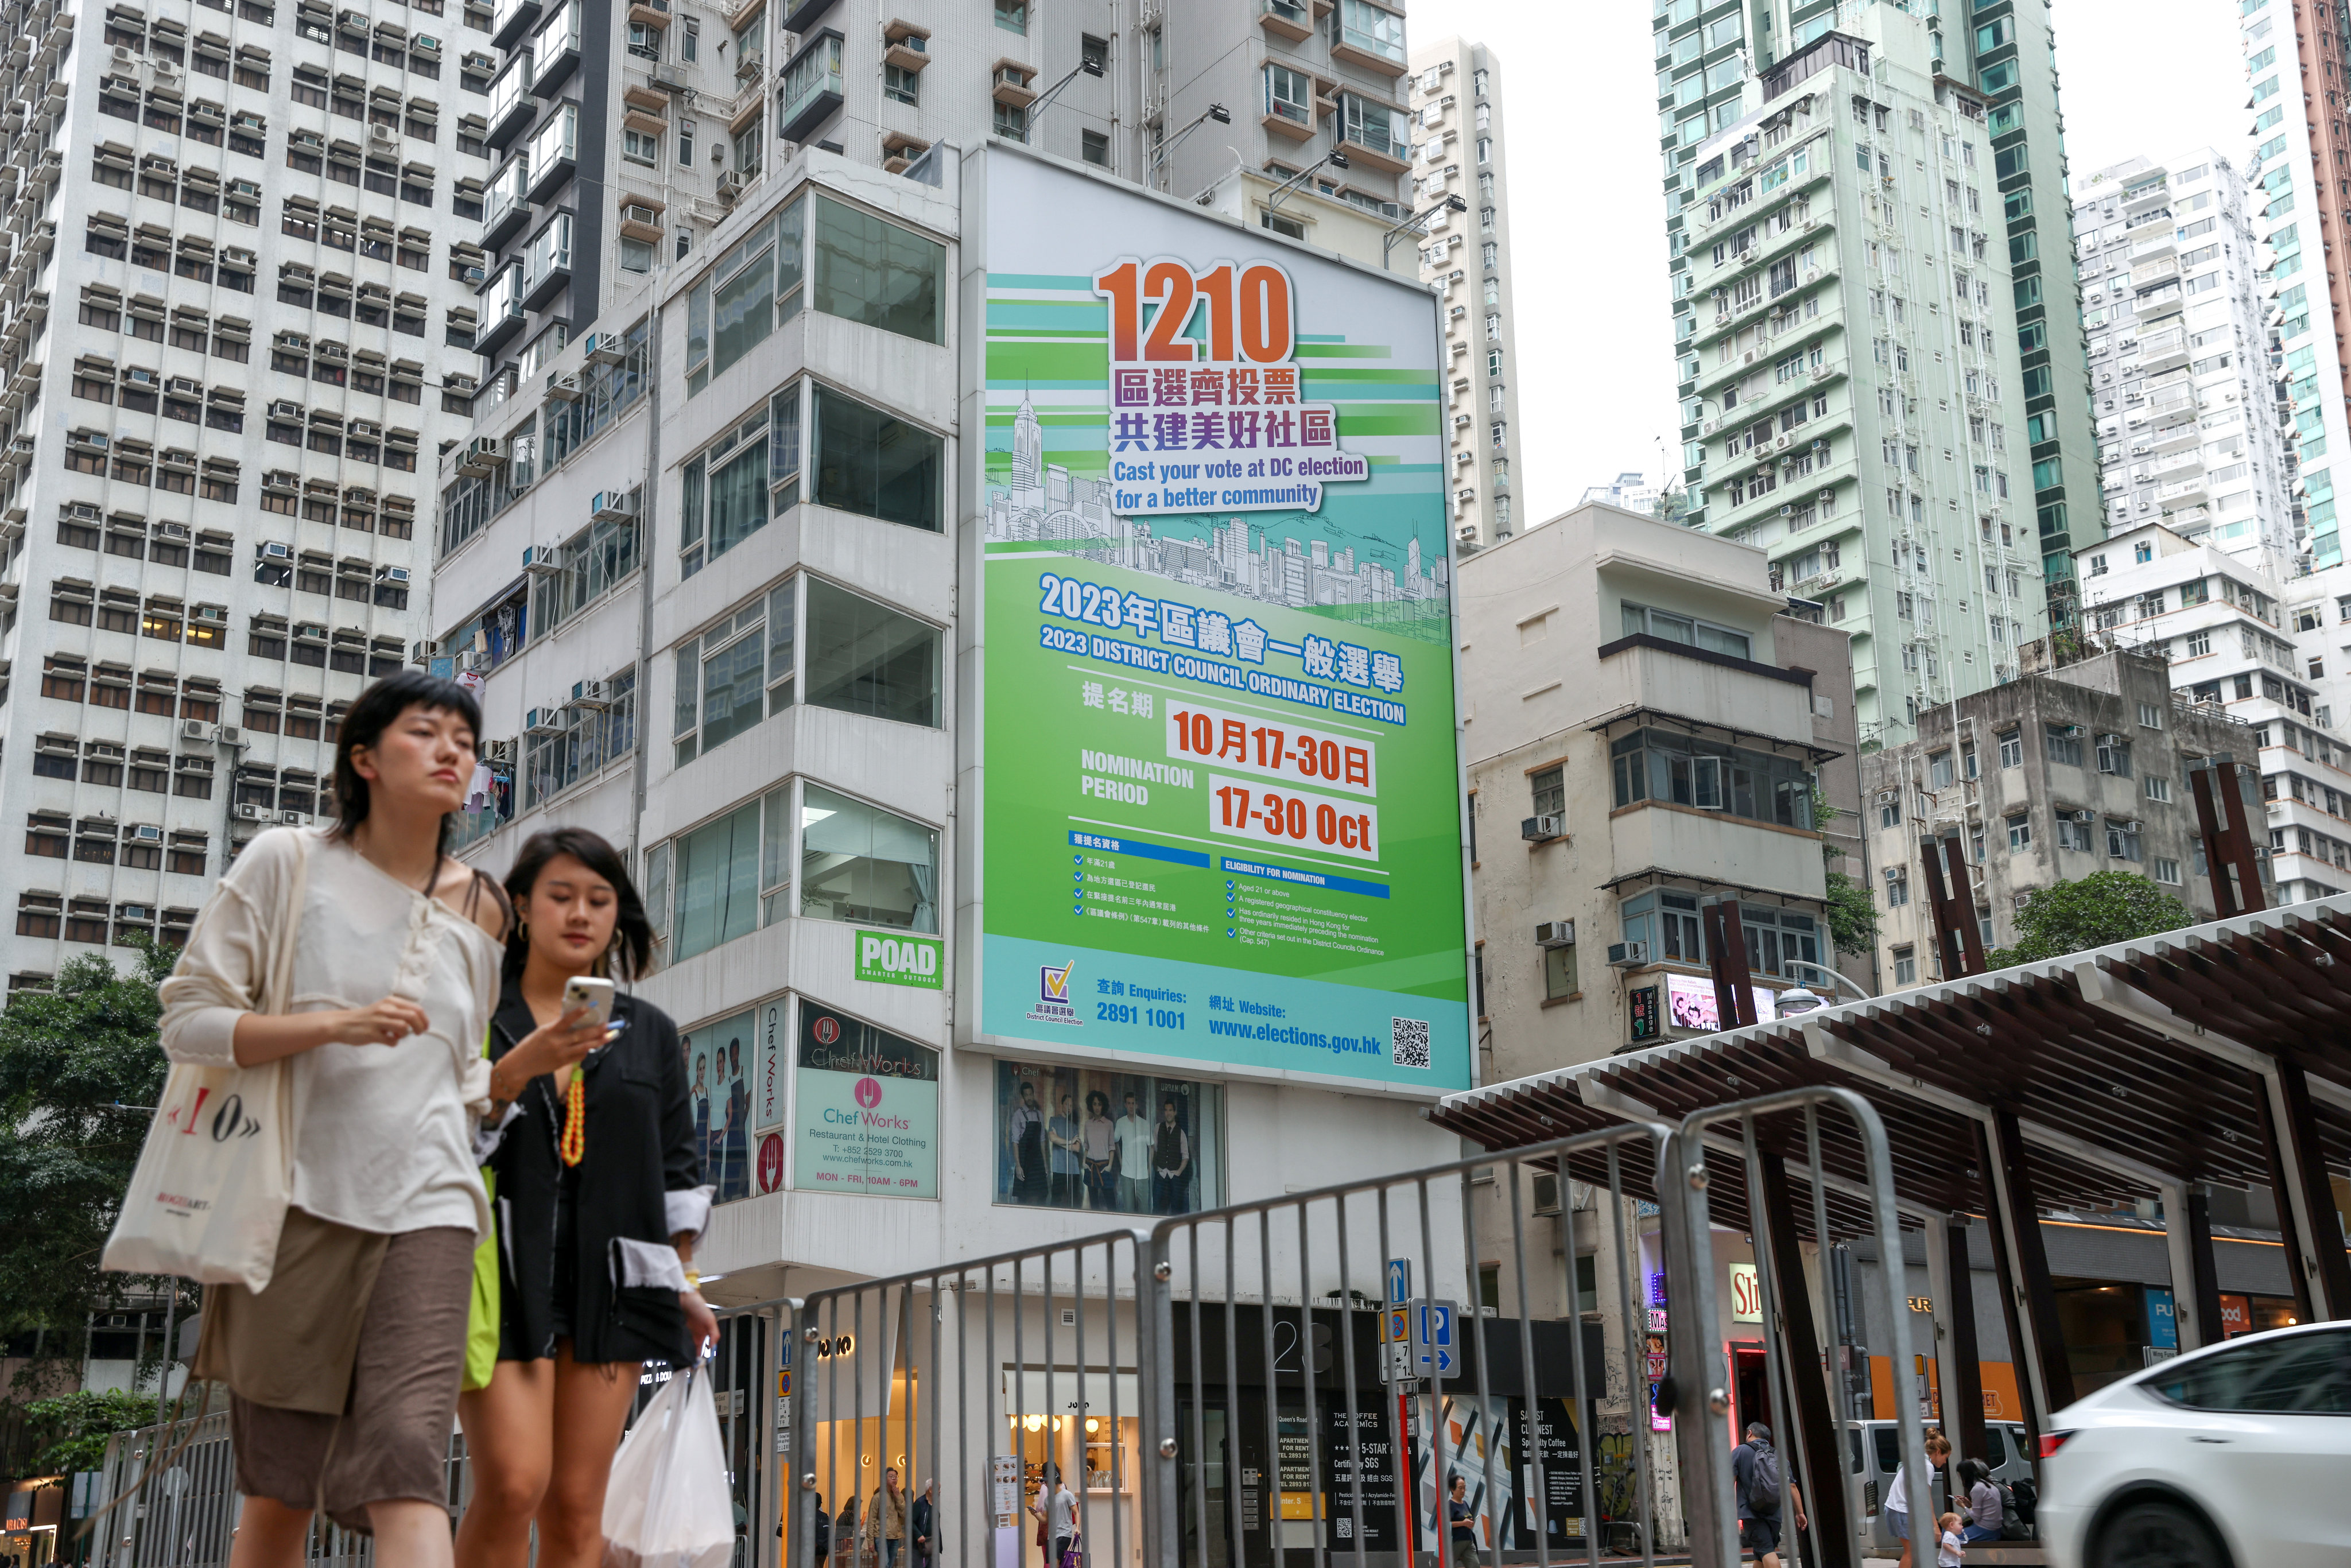 Hong Kong’s smaller political parties are struggling to cover the larger electoral constituencies created under the district council revamp. Photo: Yik Yeung-man